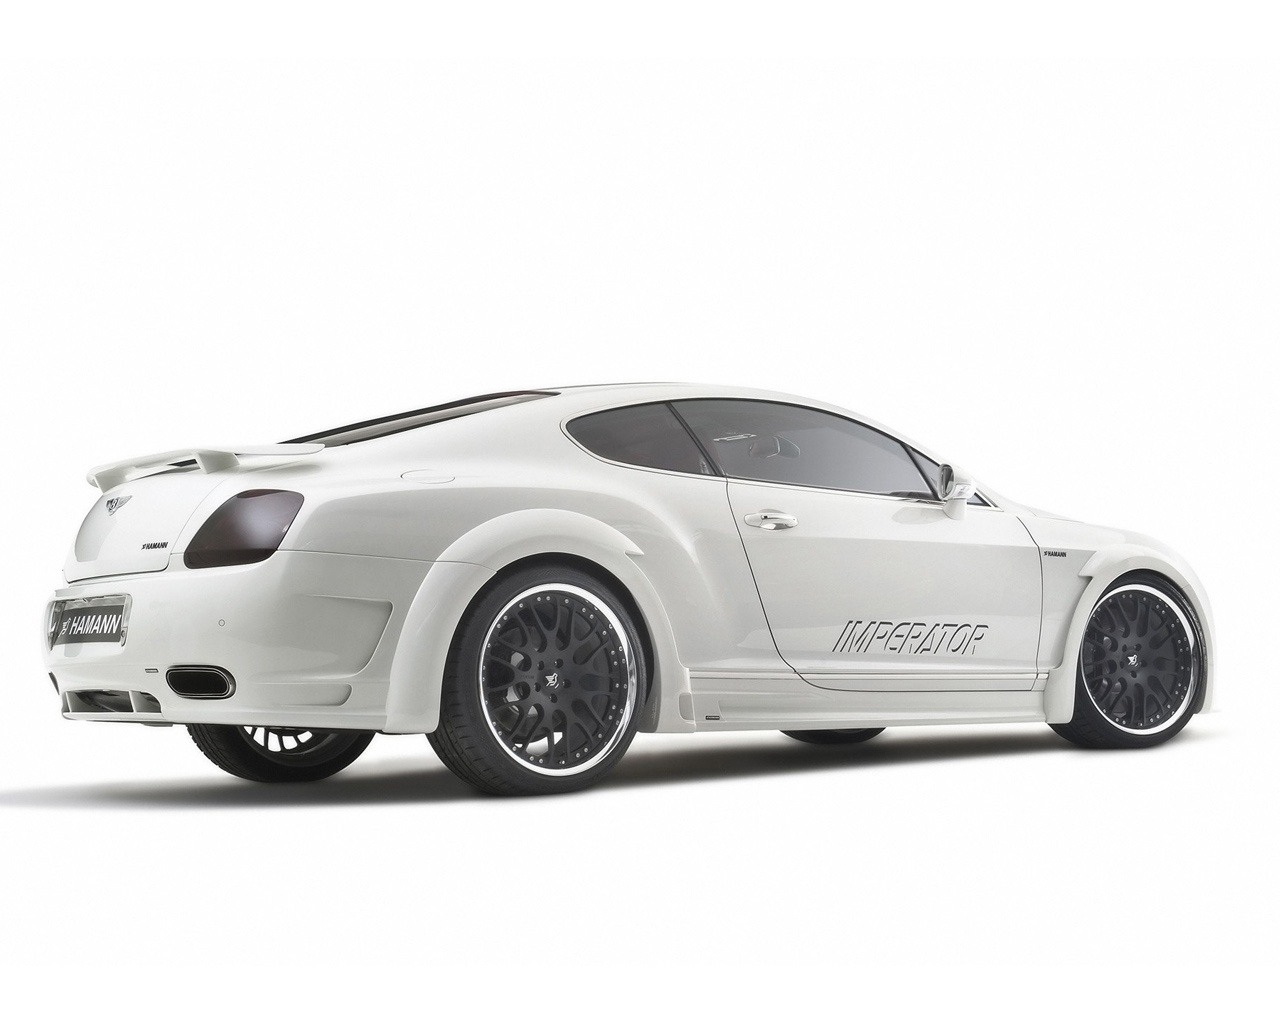 Bentley Continental GT Hamann Imperator Rear for 1280 x 1024 resolution